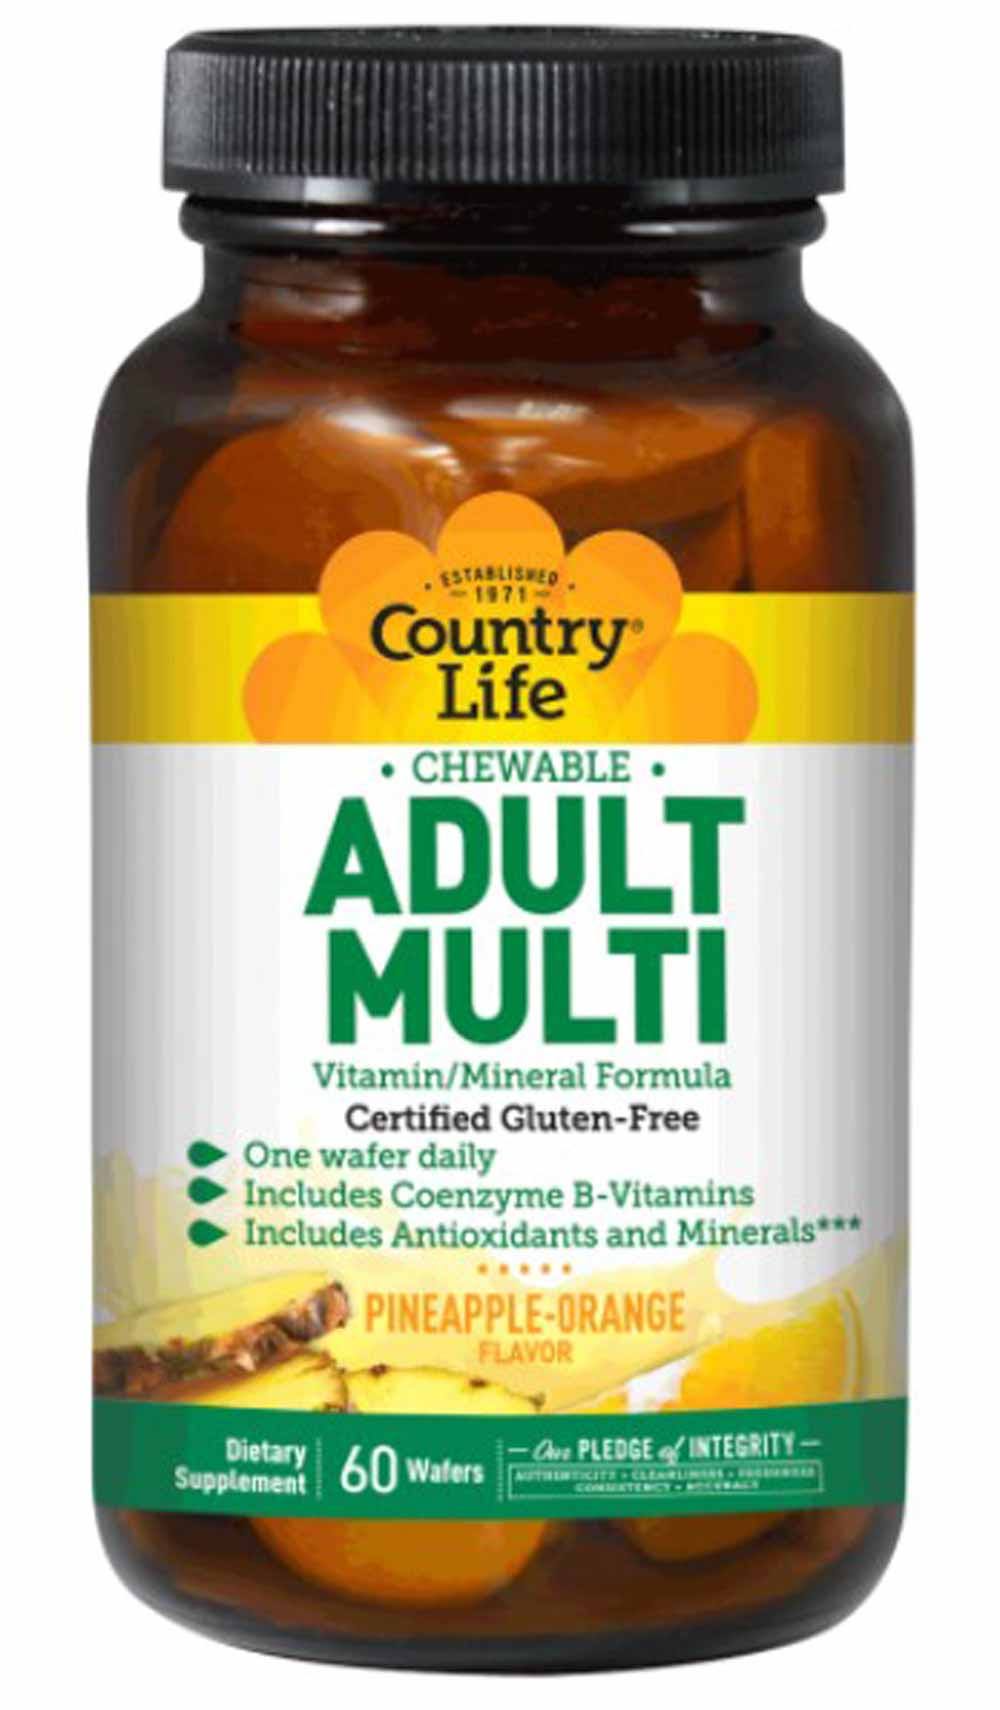 Country Life Chewable Adult's Multi Vitamins - 60 Wafers